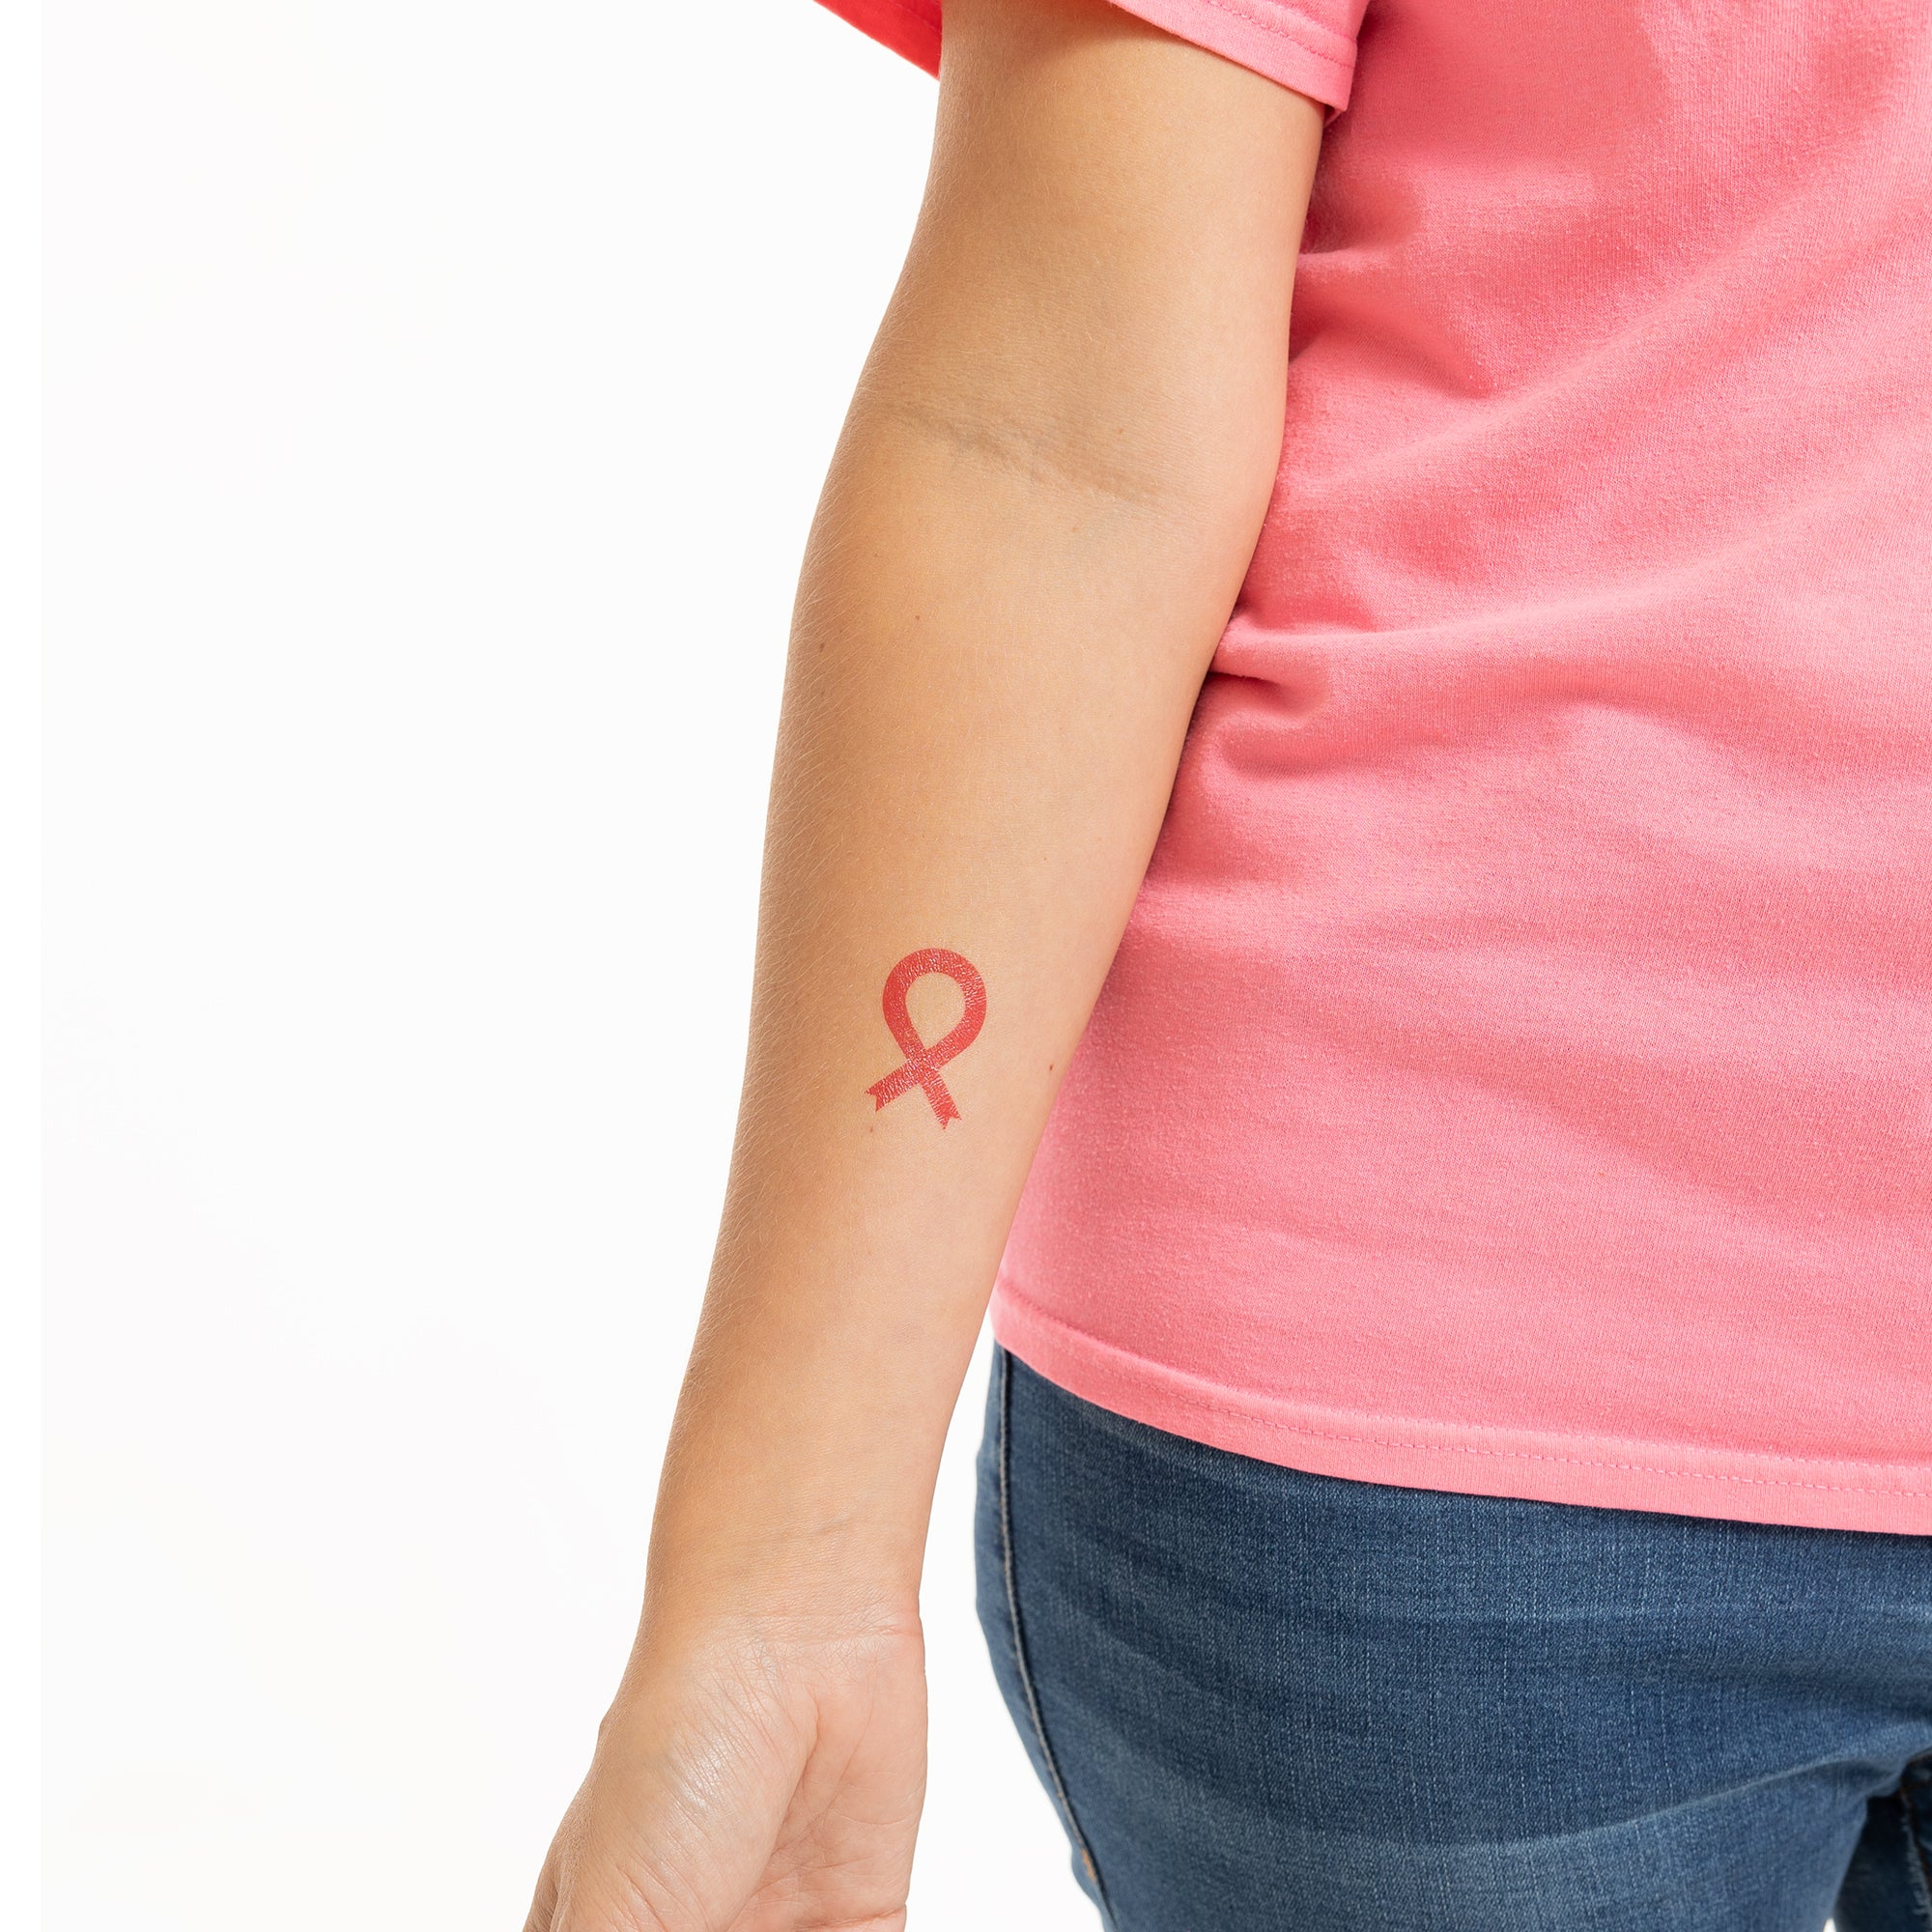 Breast Cancer Survivor Tattoos Merch & Gifts for Sale